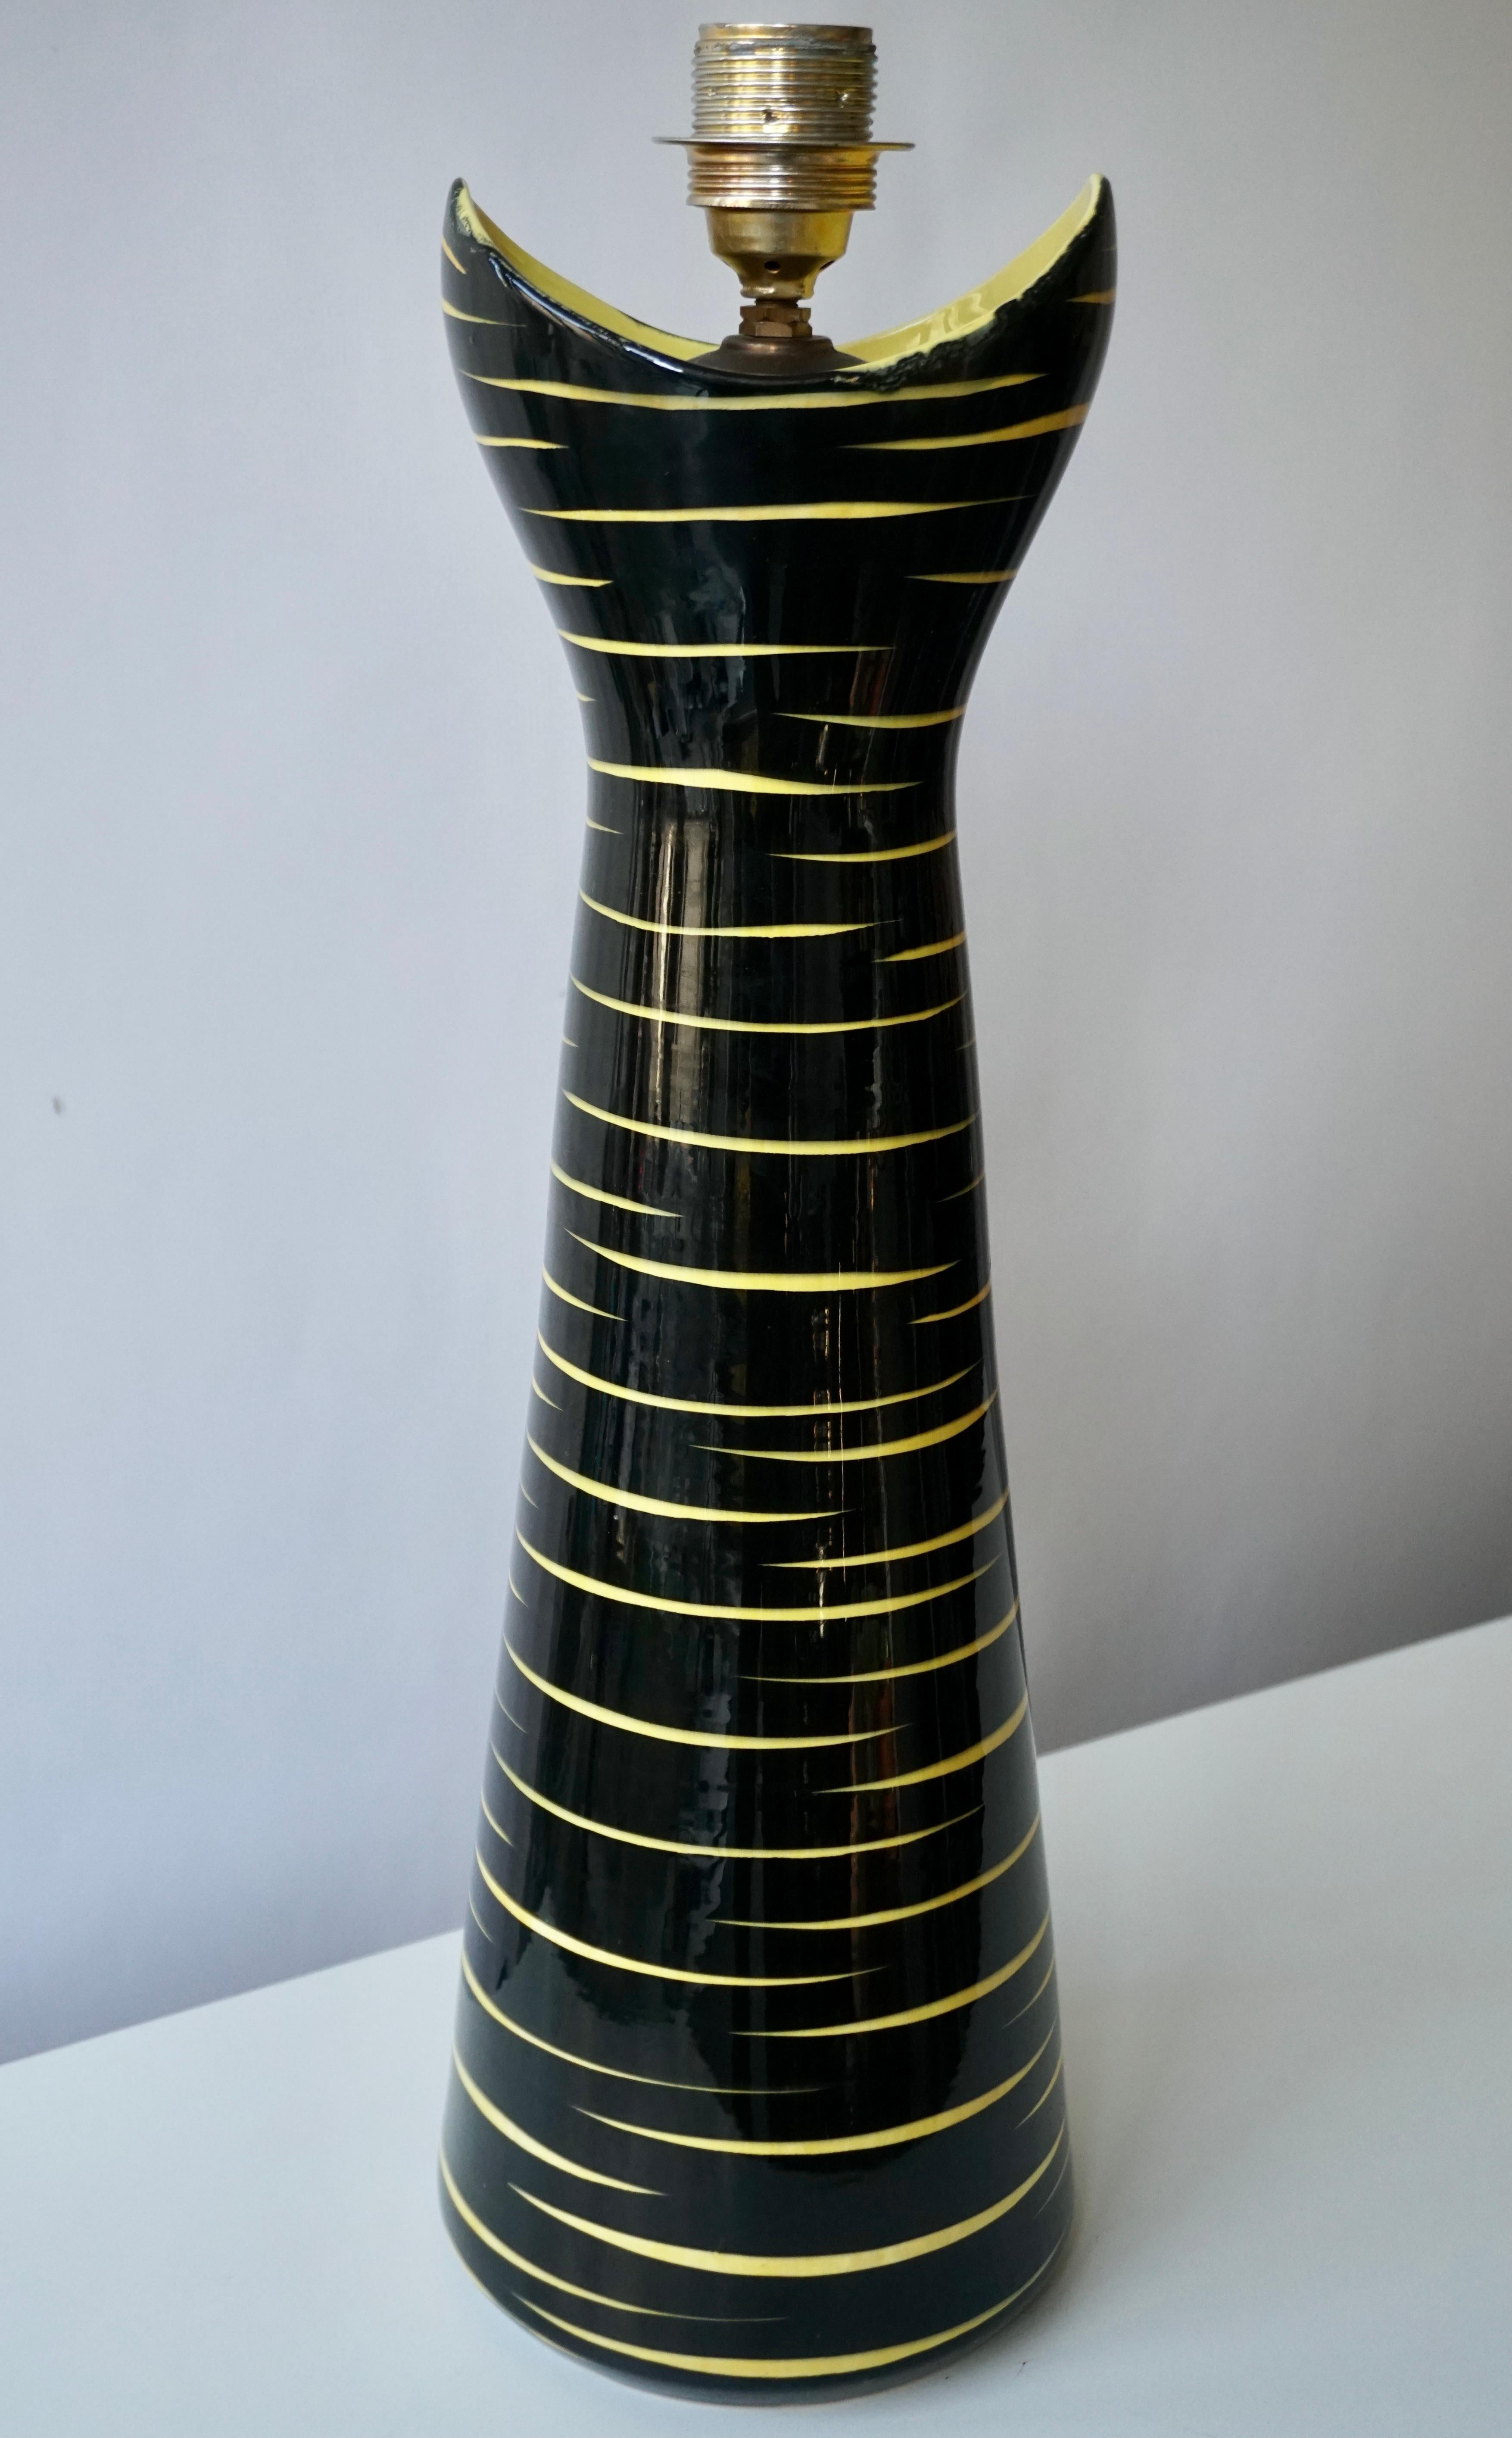 Super cool signed black and yellow ceramic table lamp, glazed finish, 21 inches to top of socket,
Germany, 1950s.
Basemark: SMF Schramberg
Brazil Dec.
   